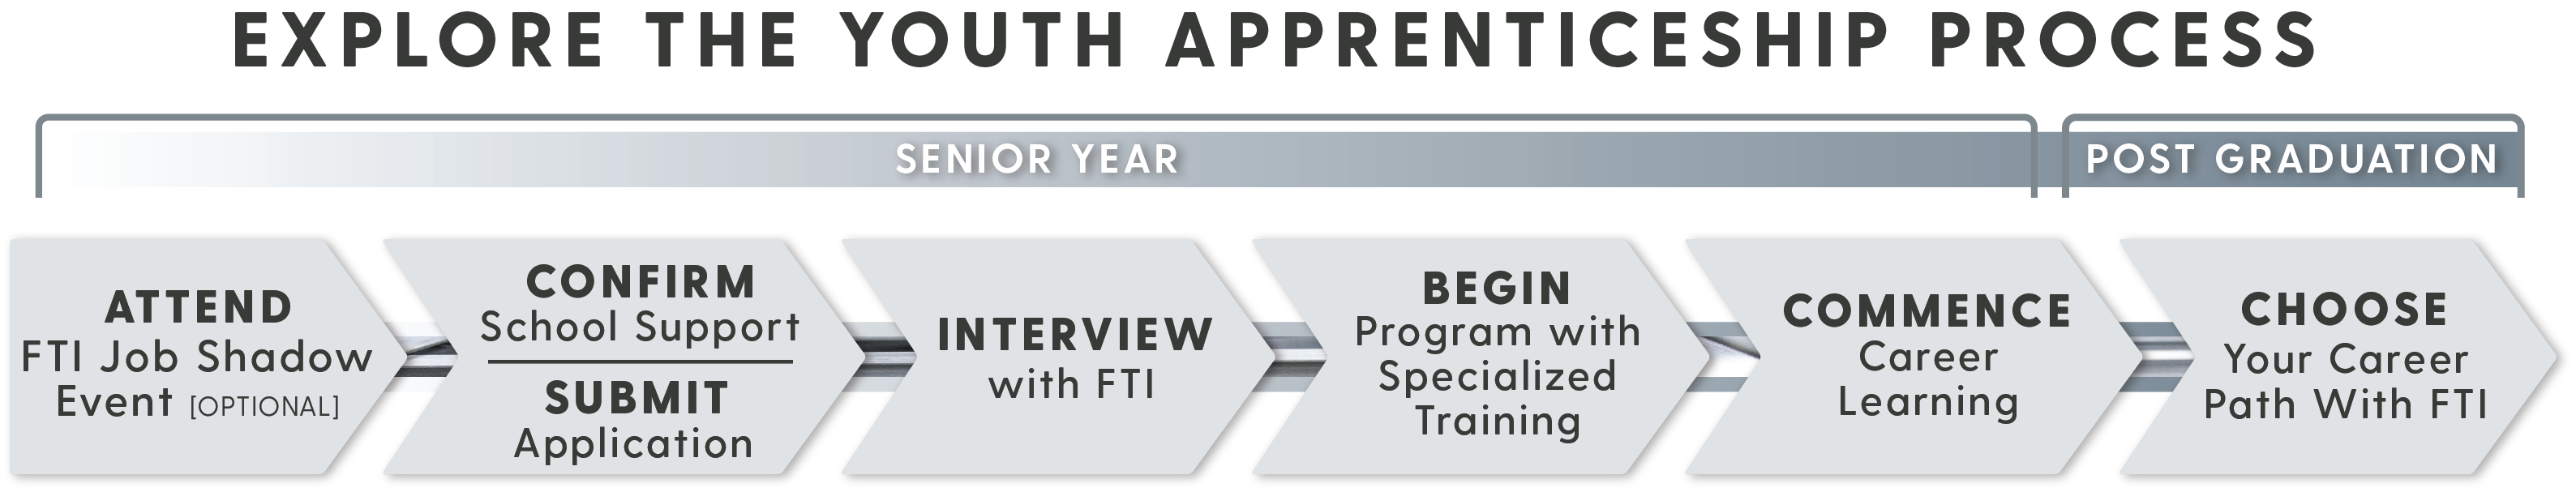 Kick start your career with Faith Technologies as a youth apprentice.